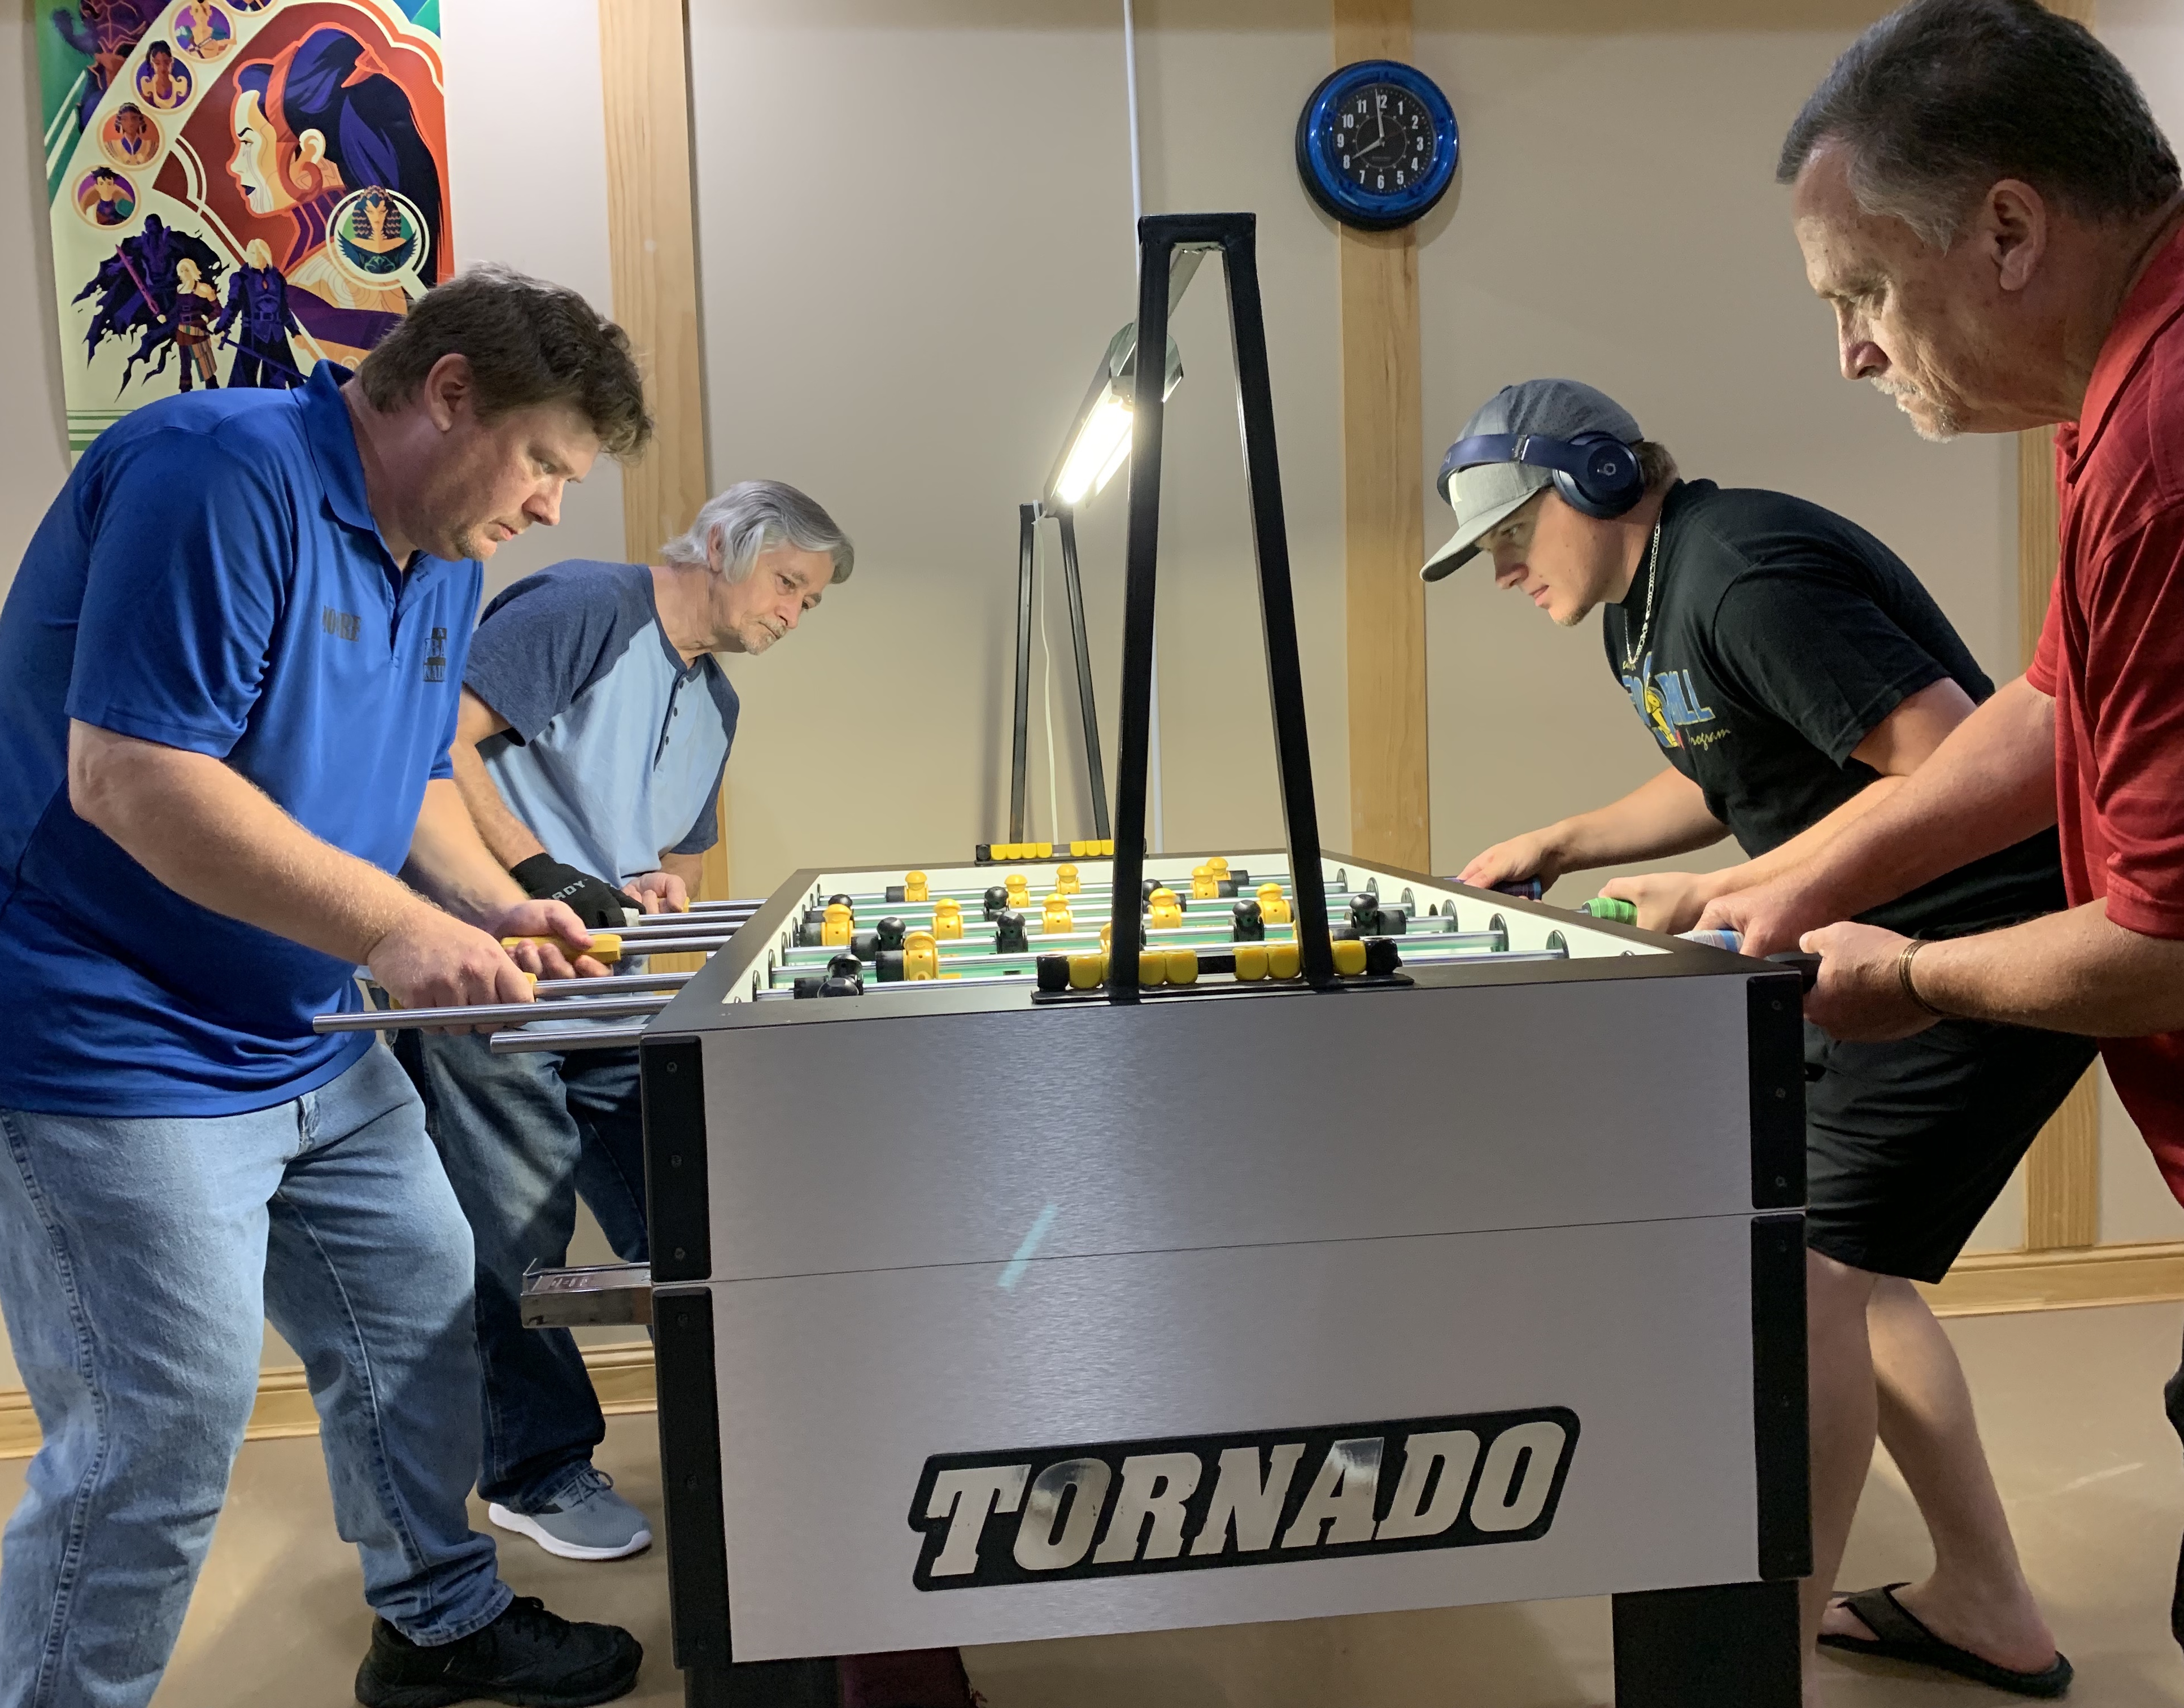 Pictured is foosball tournament action at Outbreak Games in Hanceville,AL.